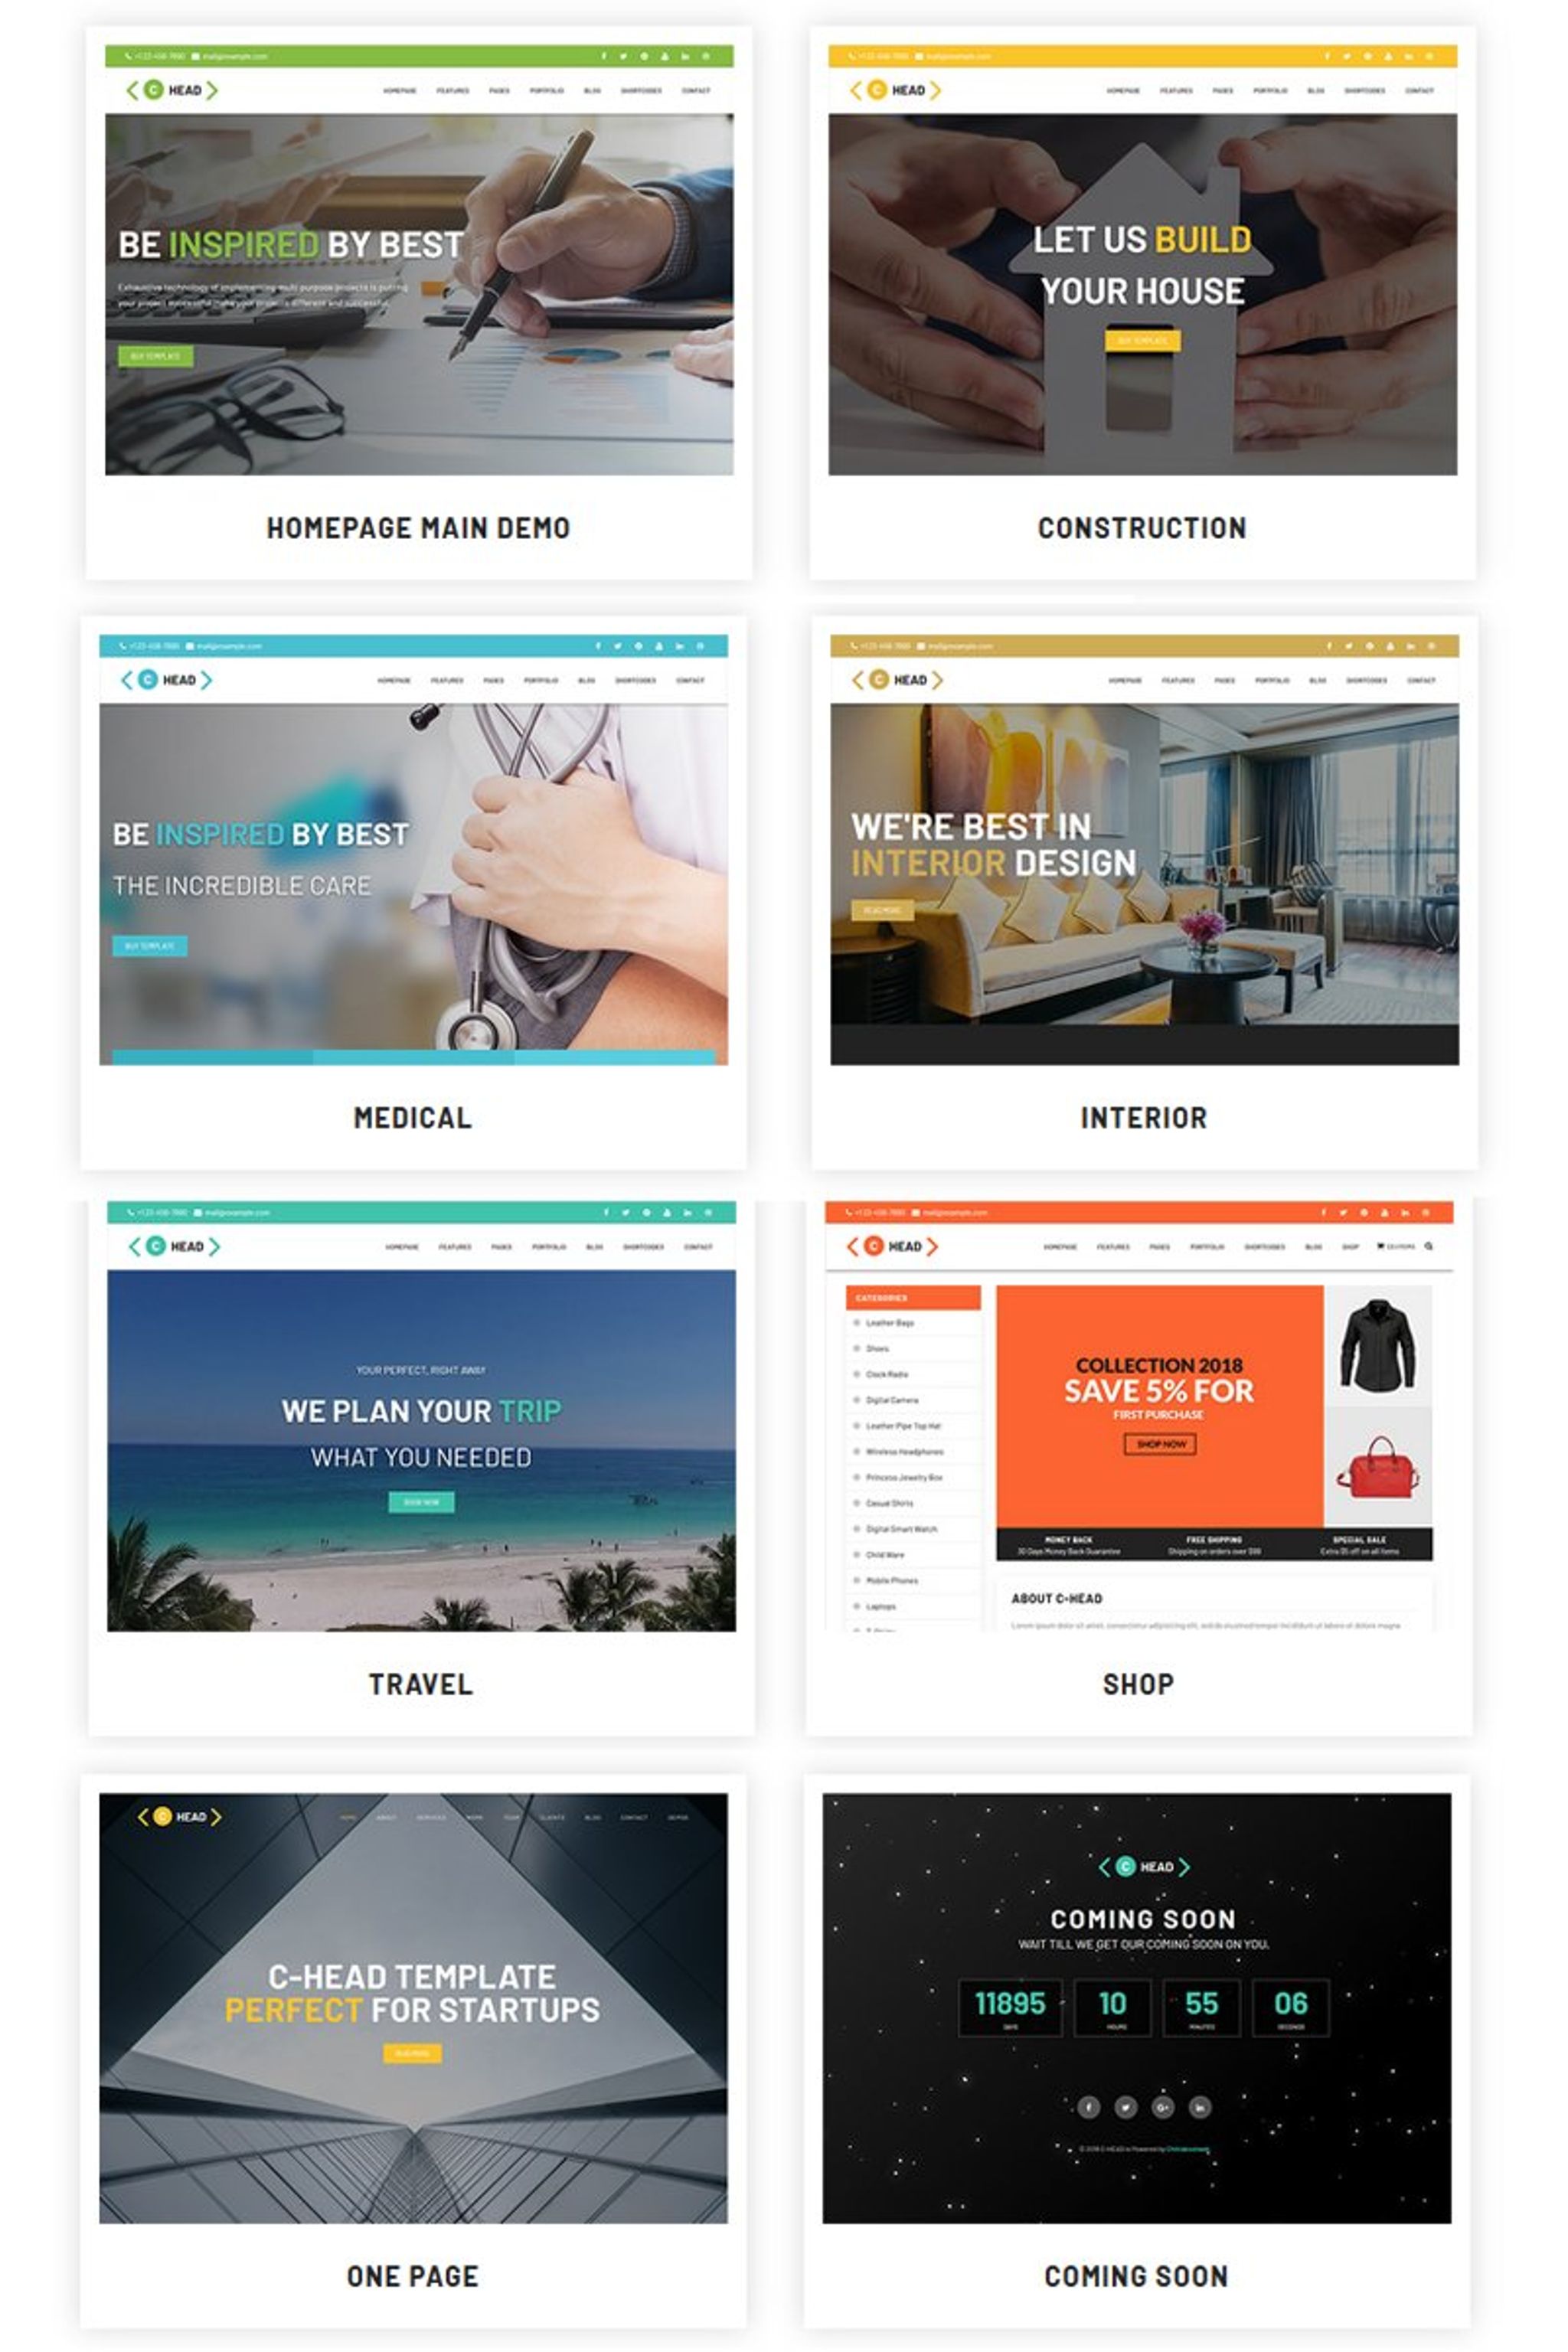 How To Use A Website Template